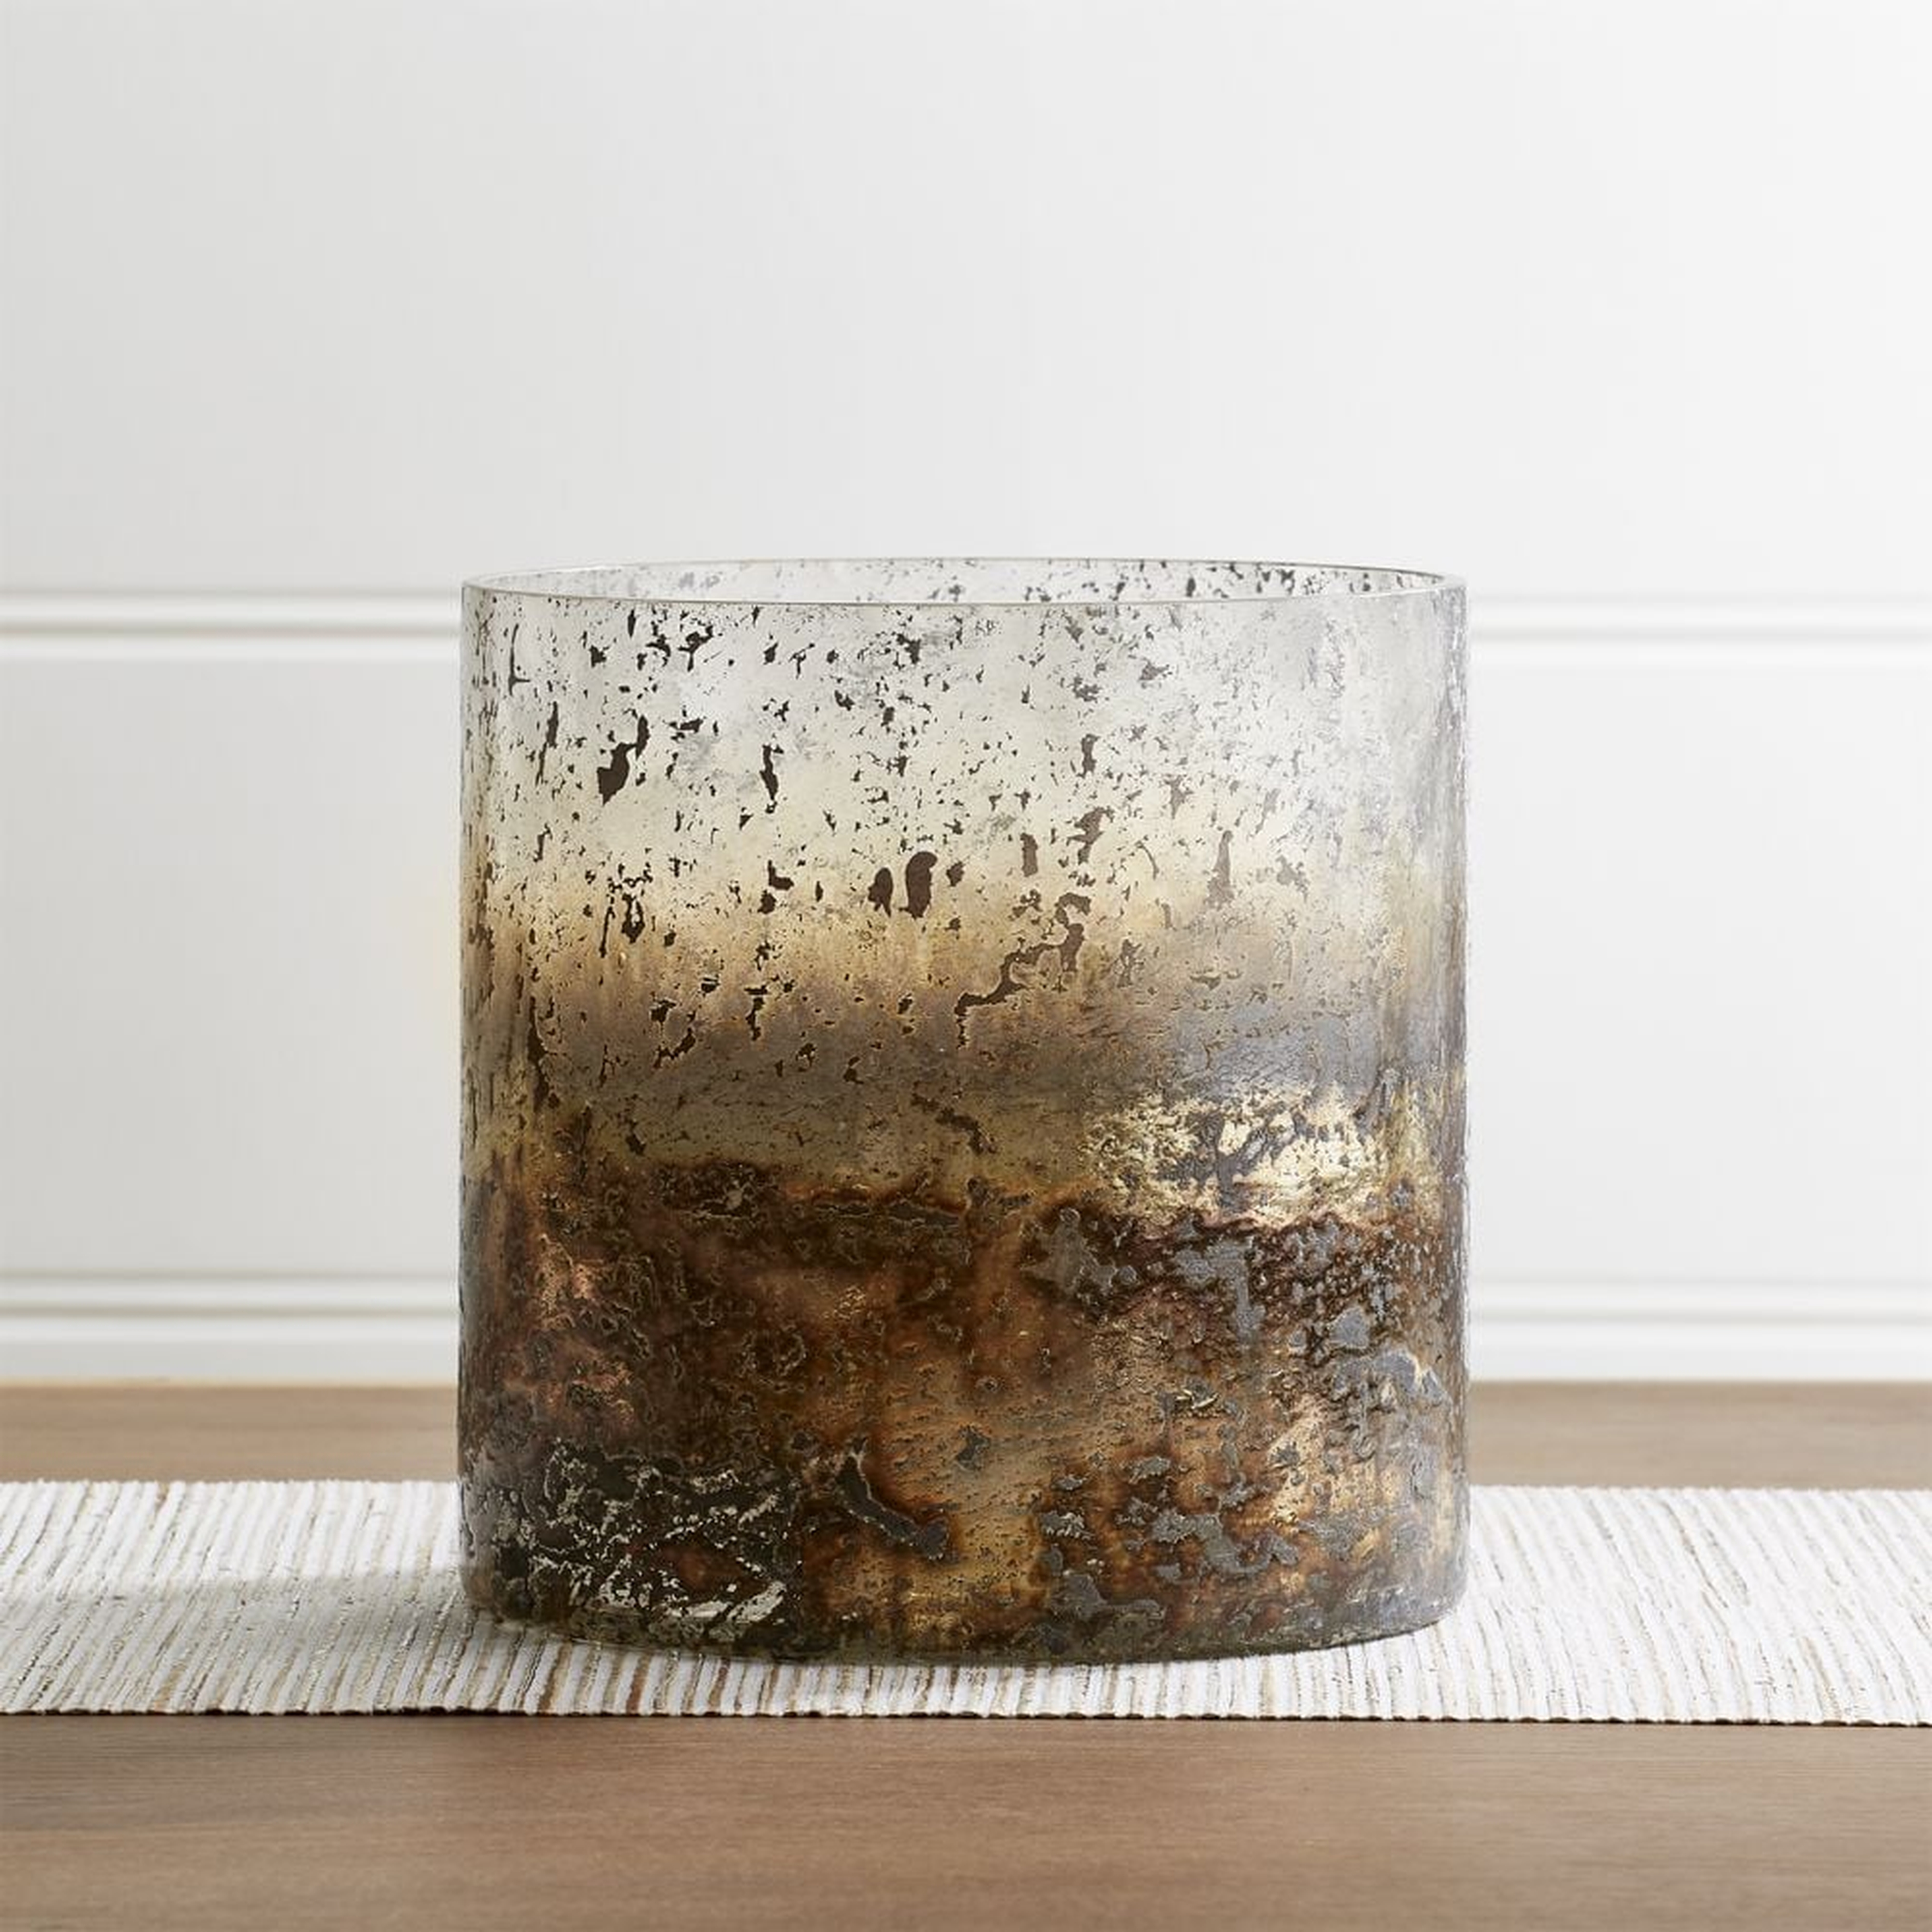 Sona 8" Glass Hurricane Candle Holder - Crate and Barrel